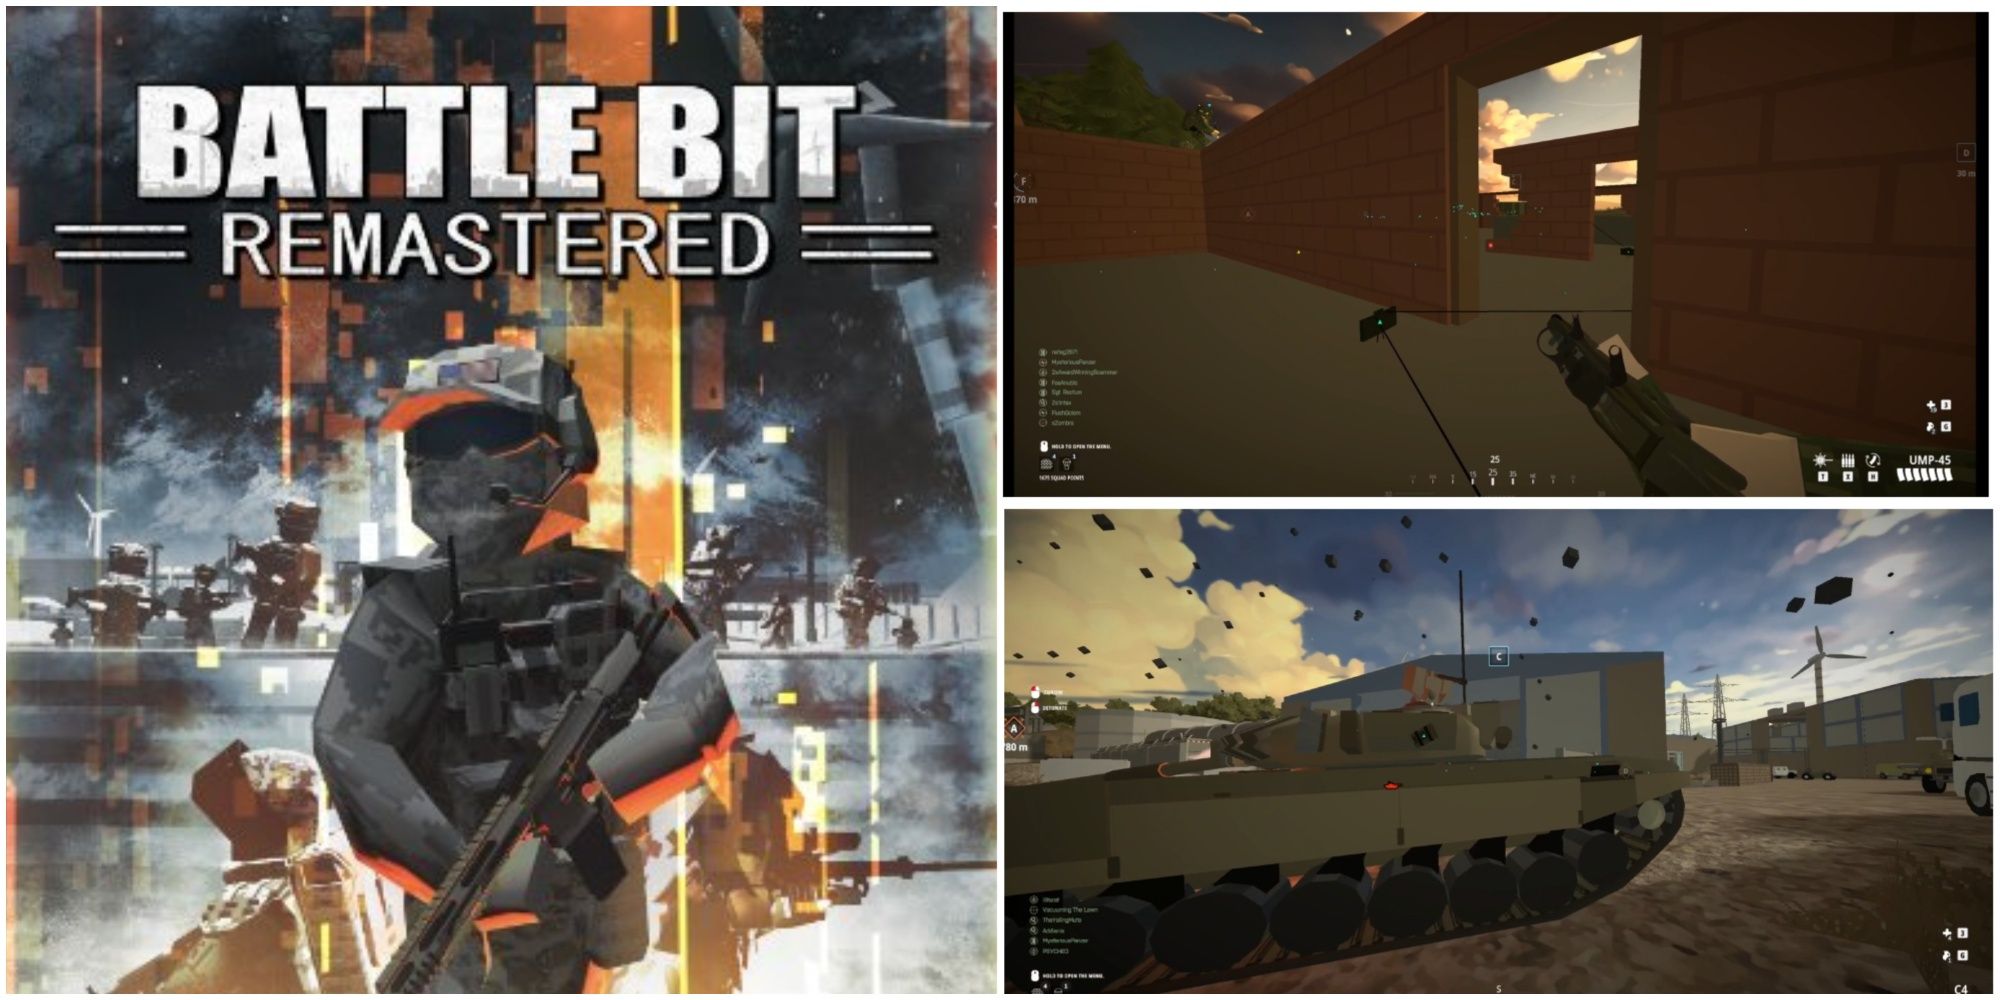 BattleBit Remastered official splash art, claymore trap, and C4 thrown onto tank